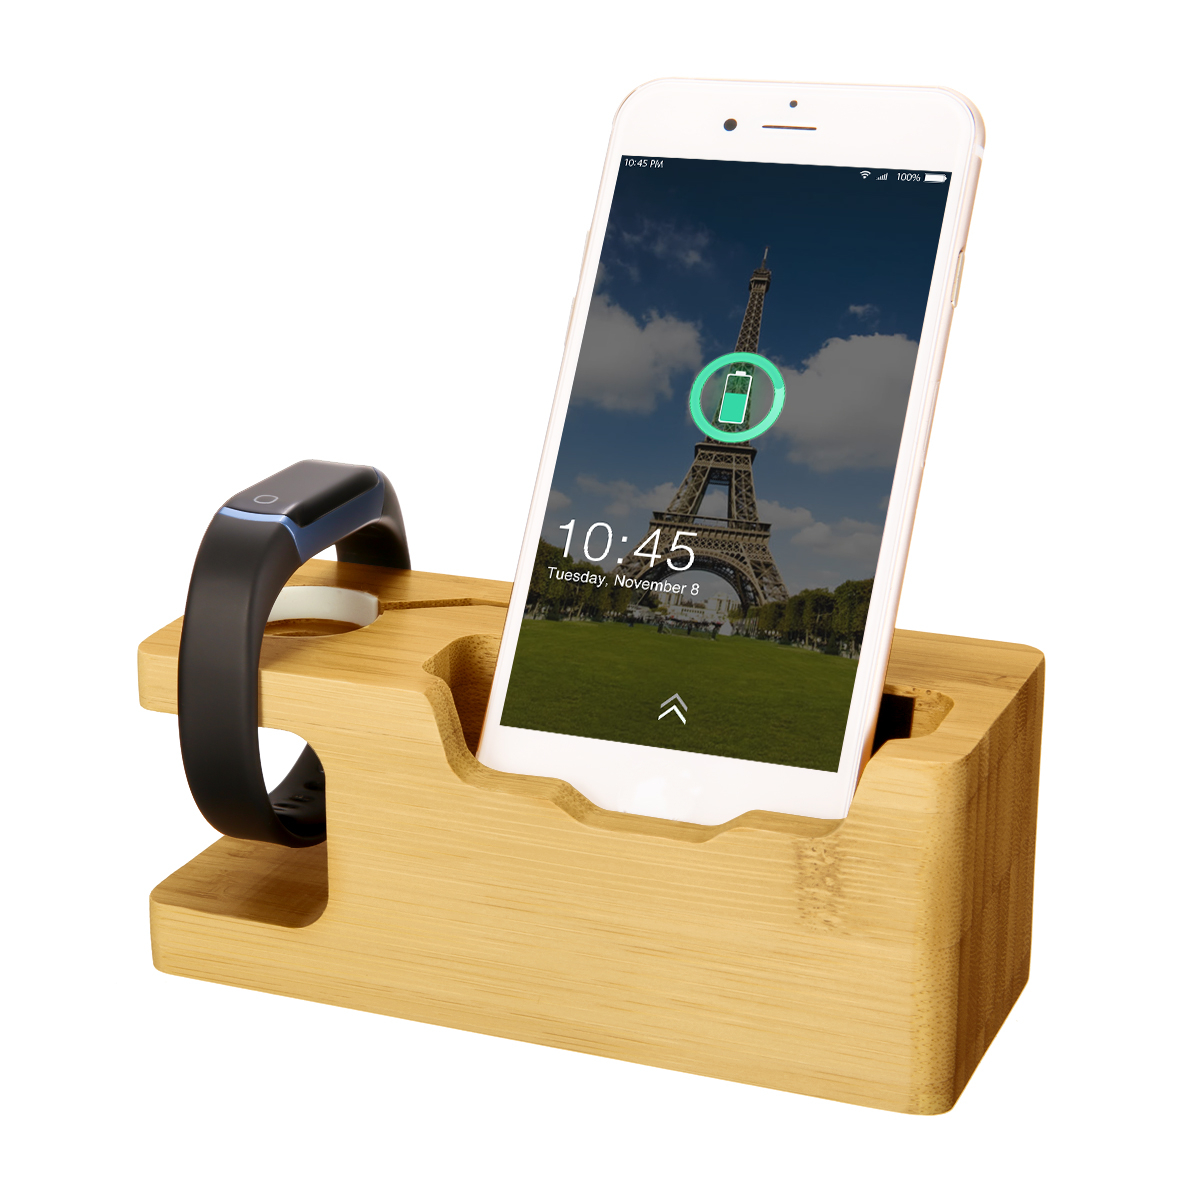 Bakeey-3USB-Charging-Station-Phone-Dock-Station-Fast-Charging-For-iPhone-XS-11Pro-MI10-Huawei-P30-P4-1720210-8